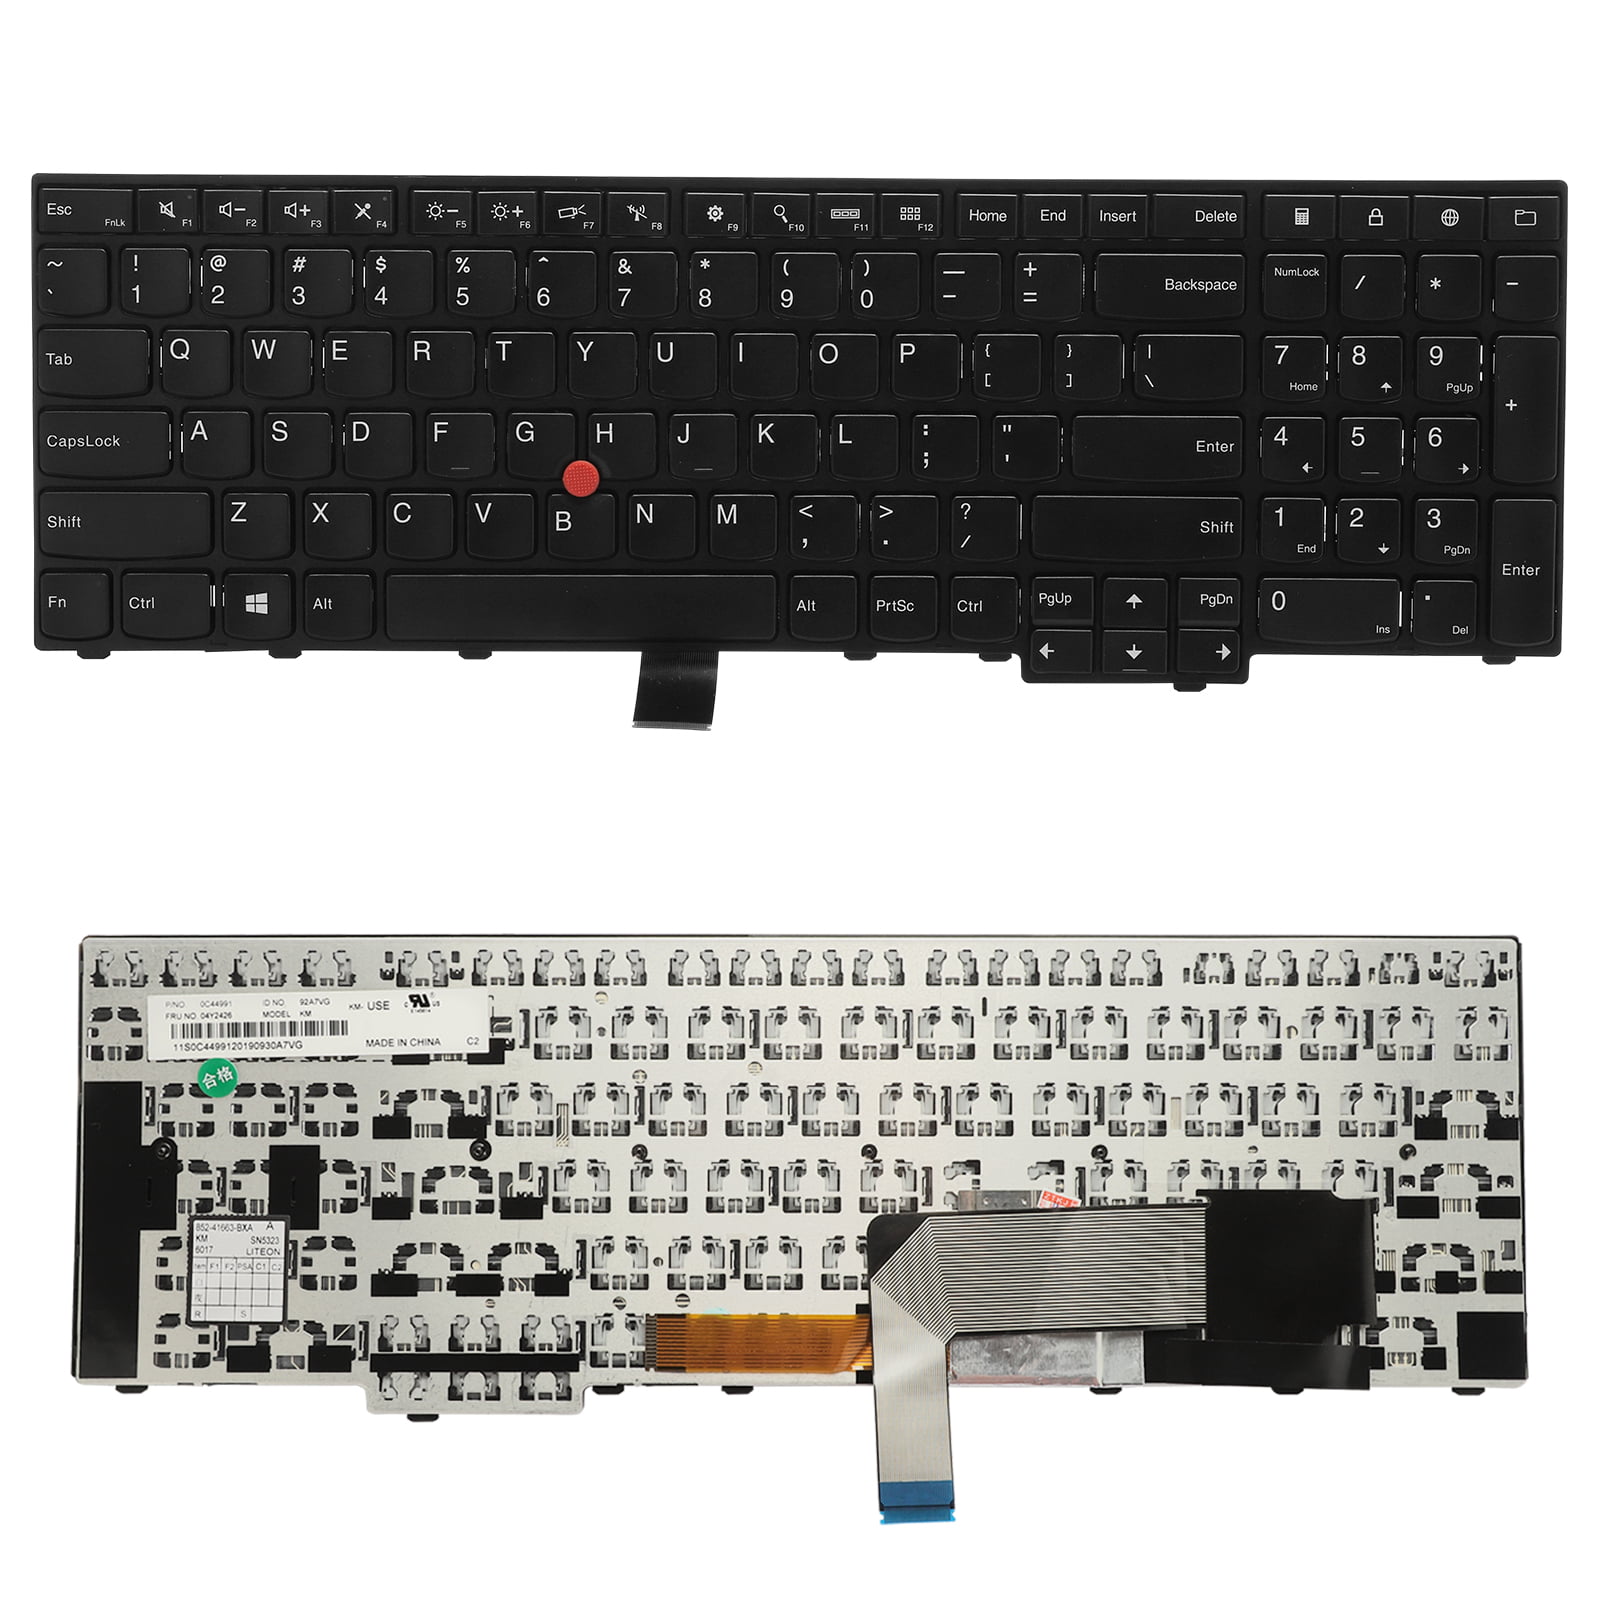 Laptop Replacement Keyboard Compatible for Lenovo ThinkPad IBM E531 E540 E545 T540 L540 US Layout Backlight